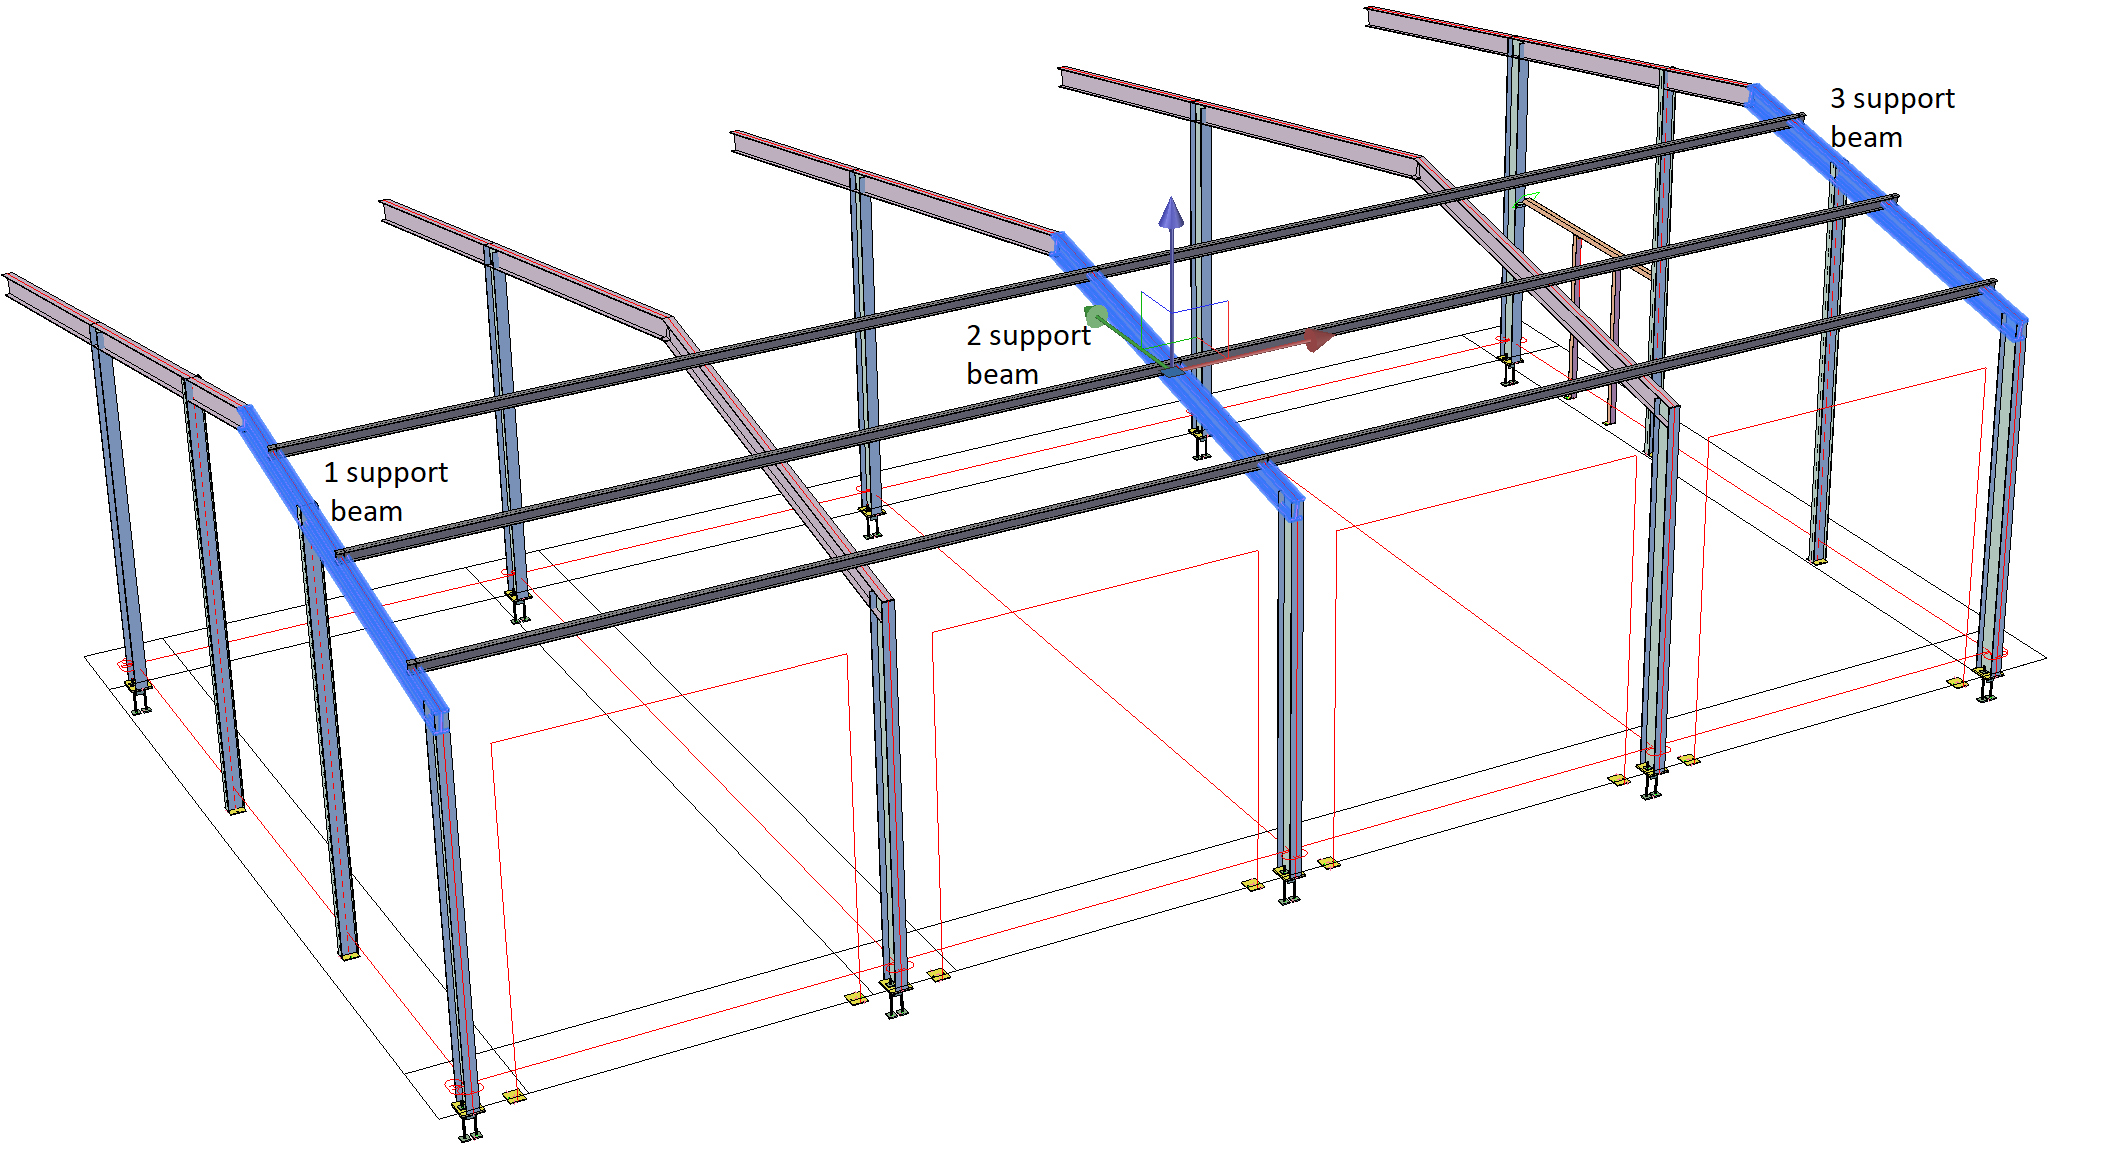 To adapt Vanity prefer It is possible to have 2 purlins in one line when 4 span exists in an  Advance Steel model | Advance Steel | Autodesk Knowledge Network